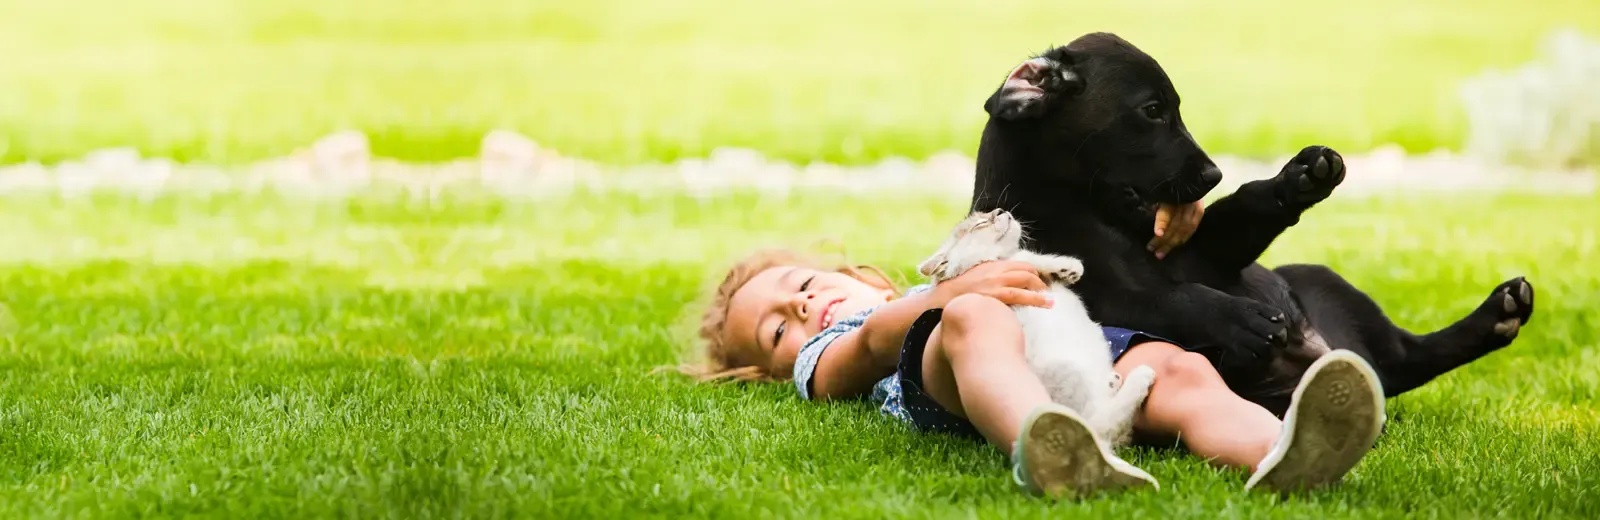 Girl playing with dog and cat in grass